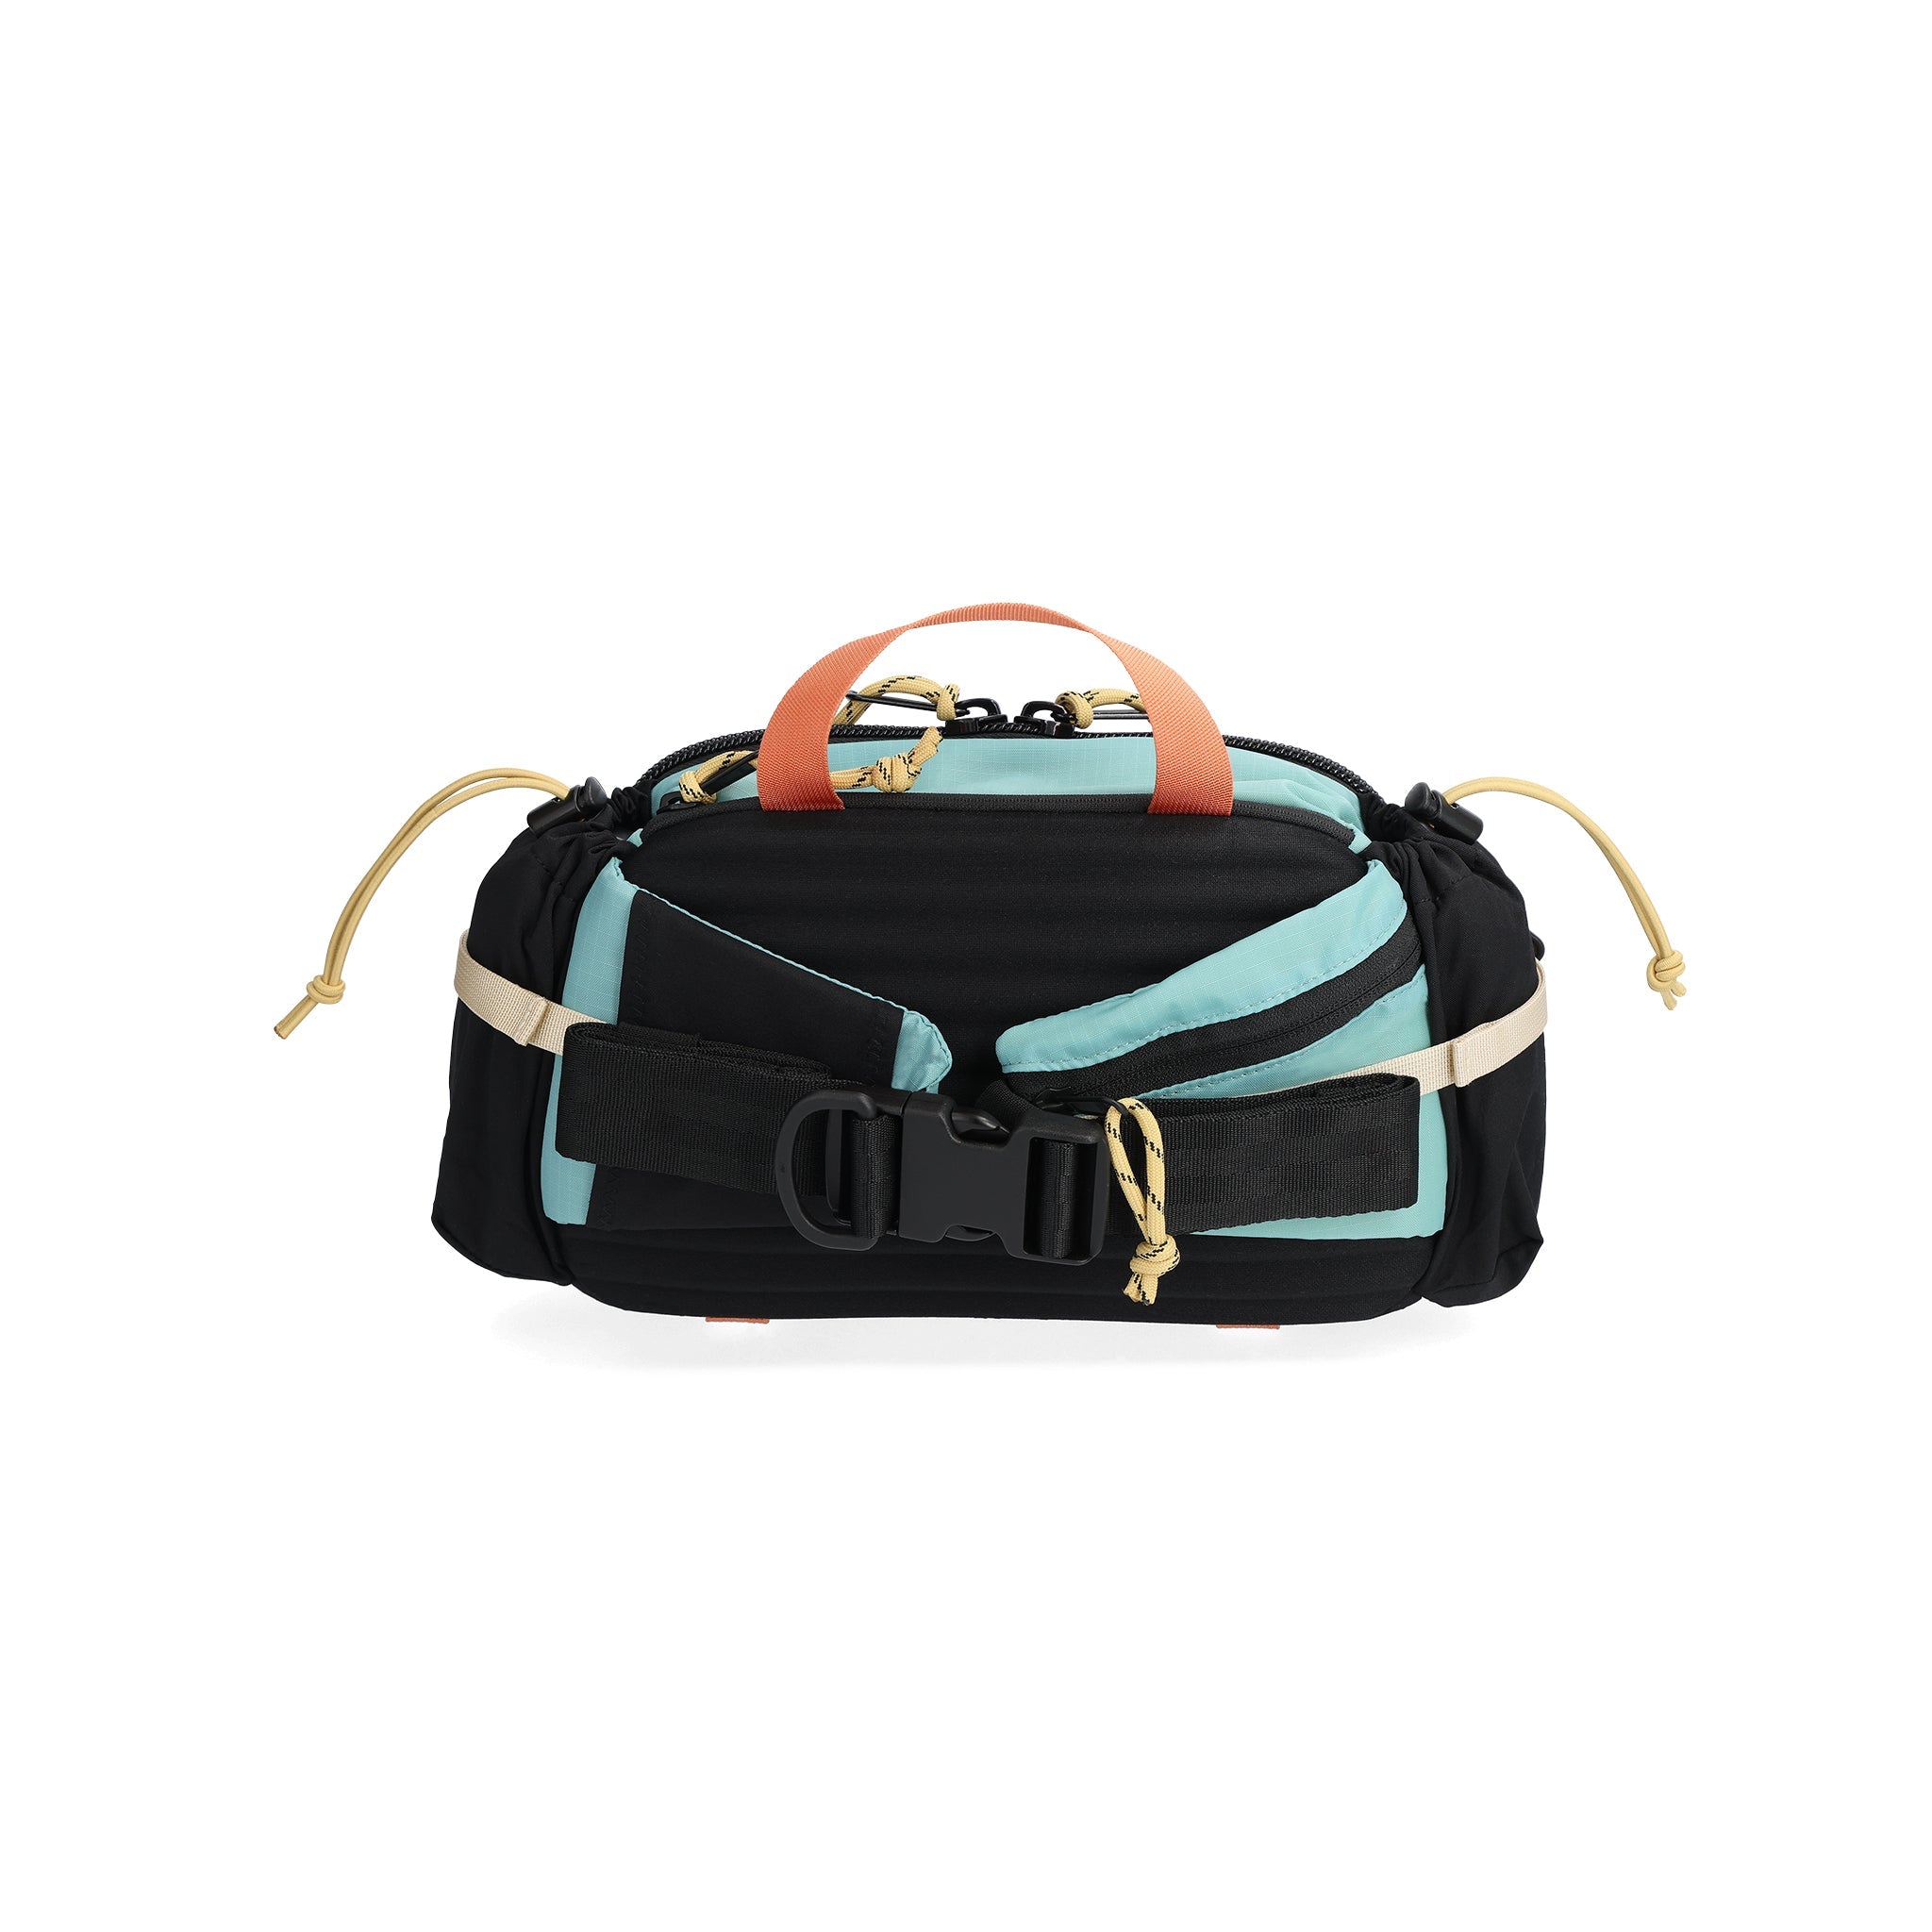 Back View of Topo Designs Mountain Hydro Hip Pack in "Geode Green / Sea Pine"